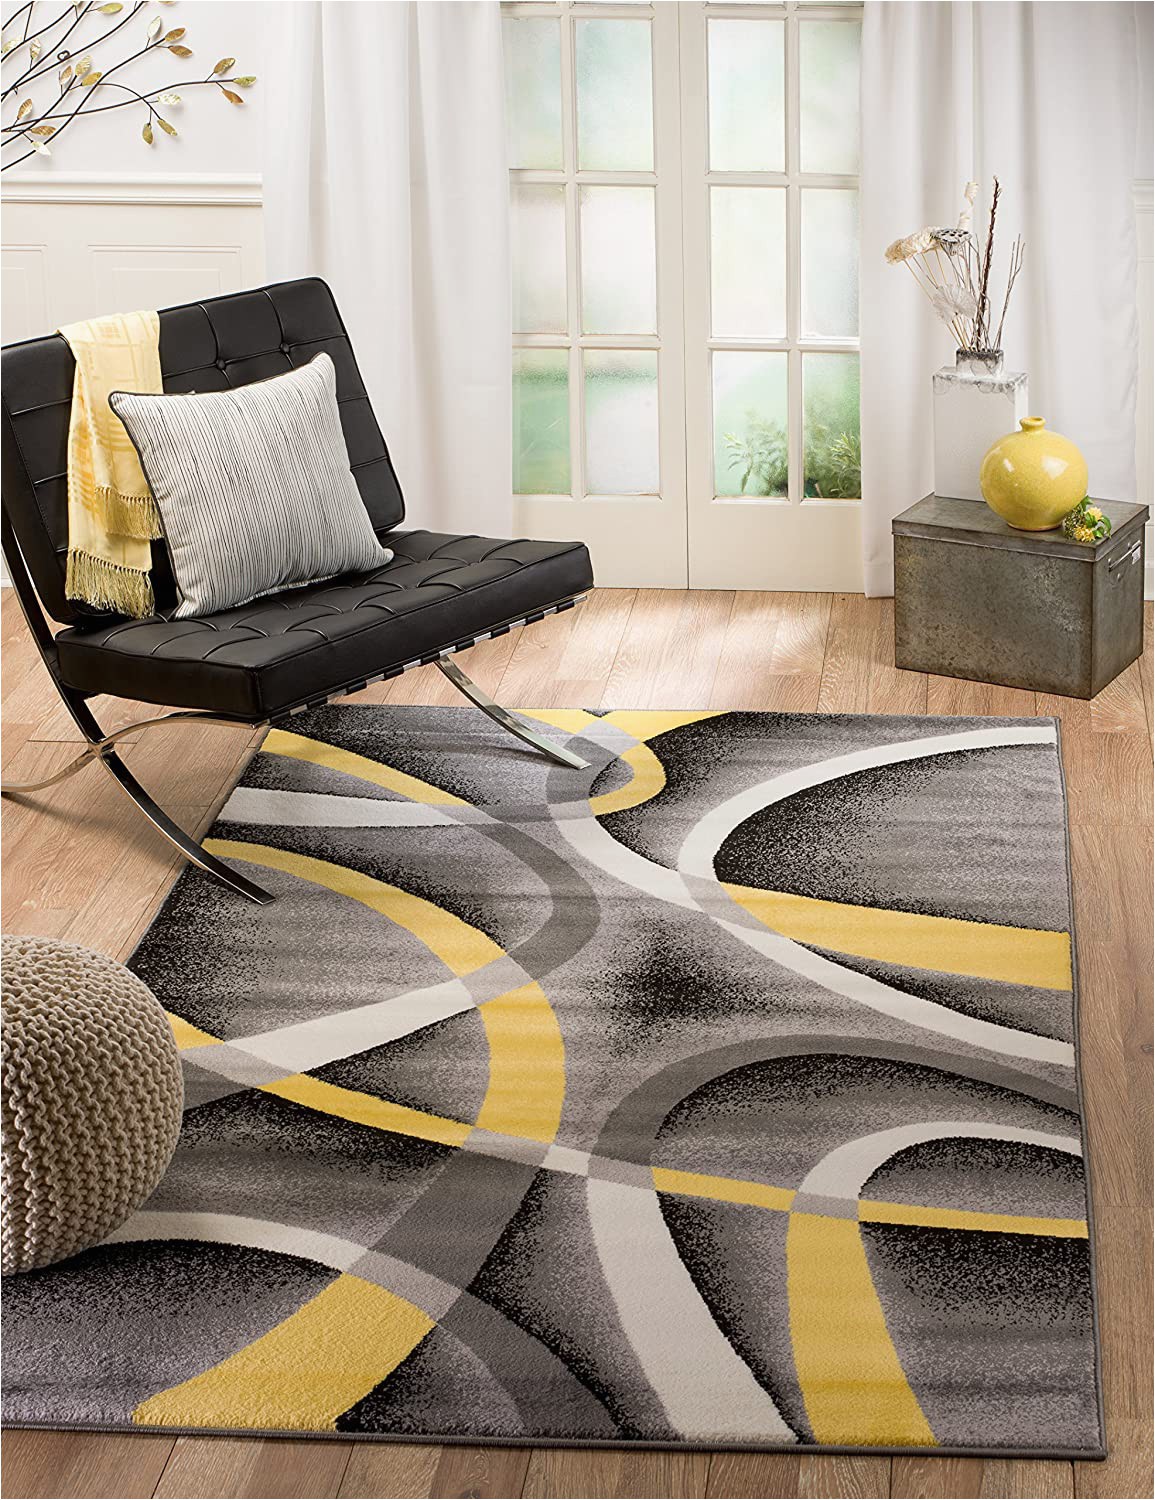 Grey Yellow White area Rug Summit 21 New Yellow Grey area Rug Modern Abstract Many Sizes Available 4 10 X 7 2